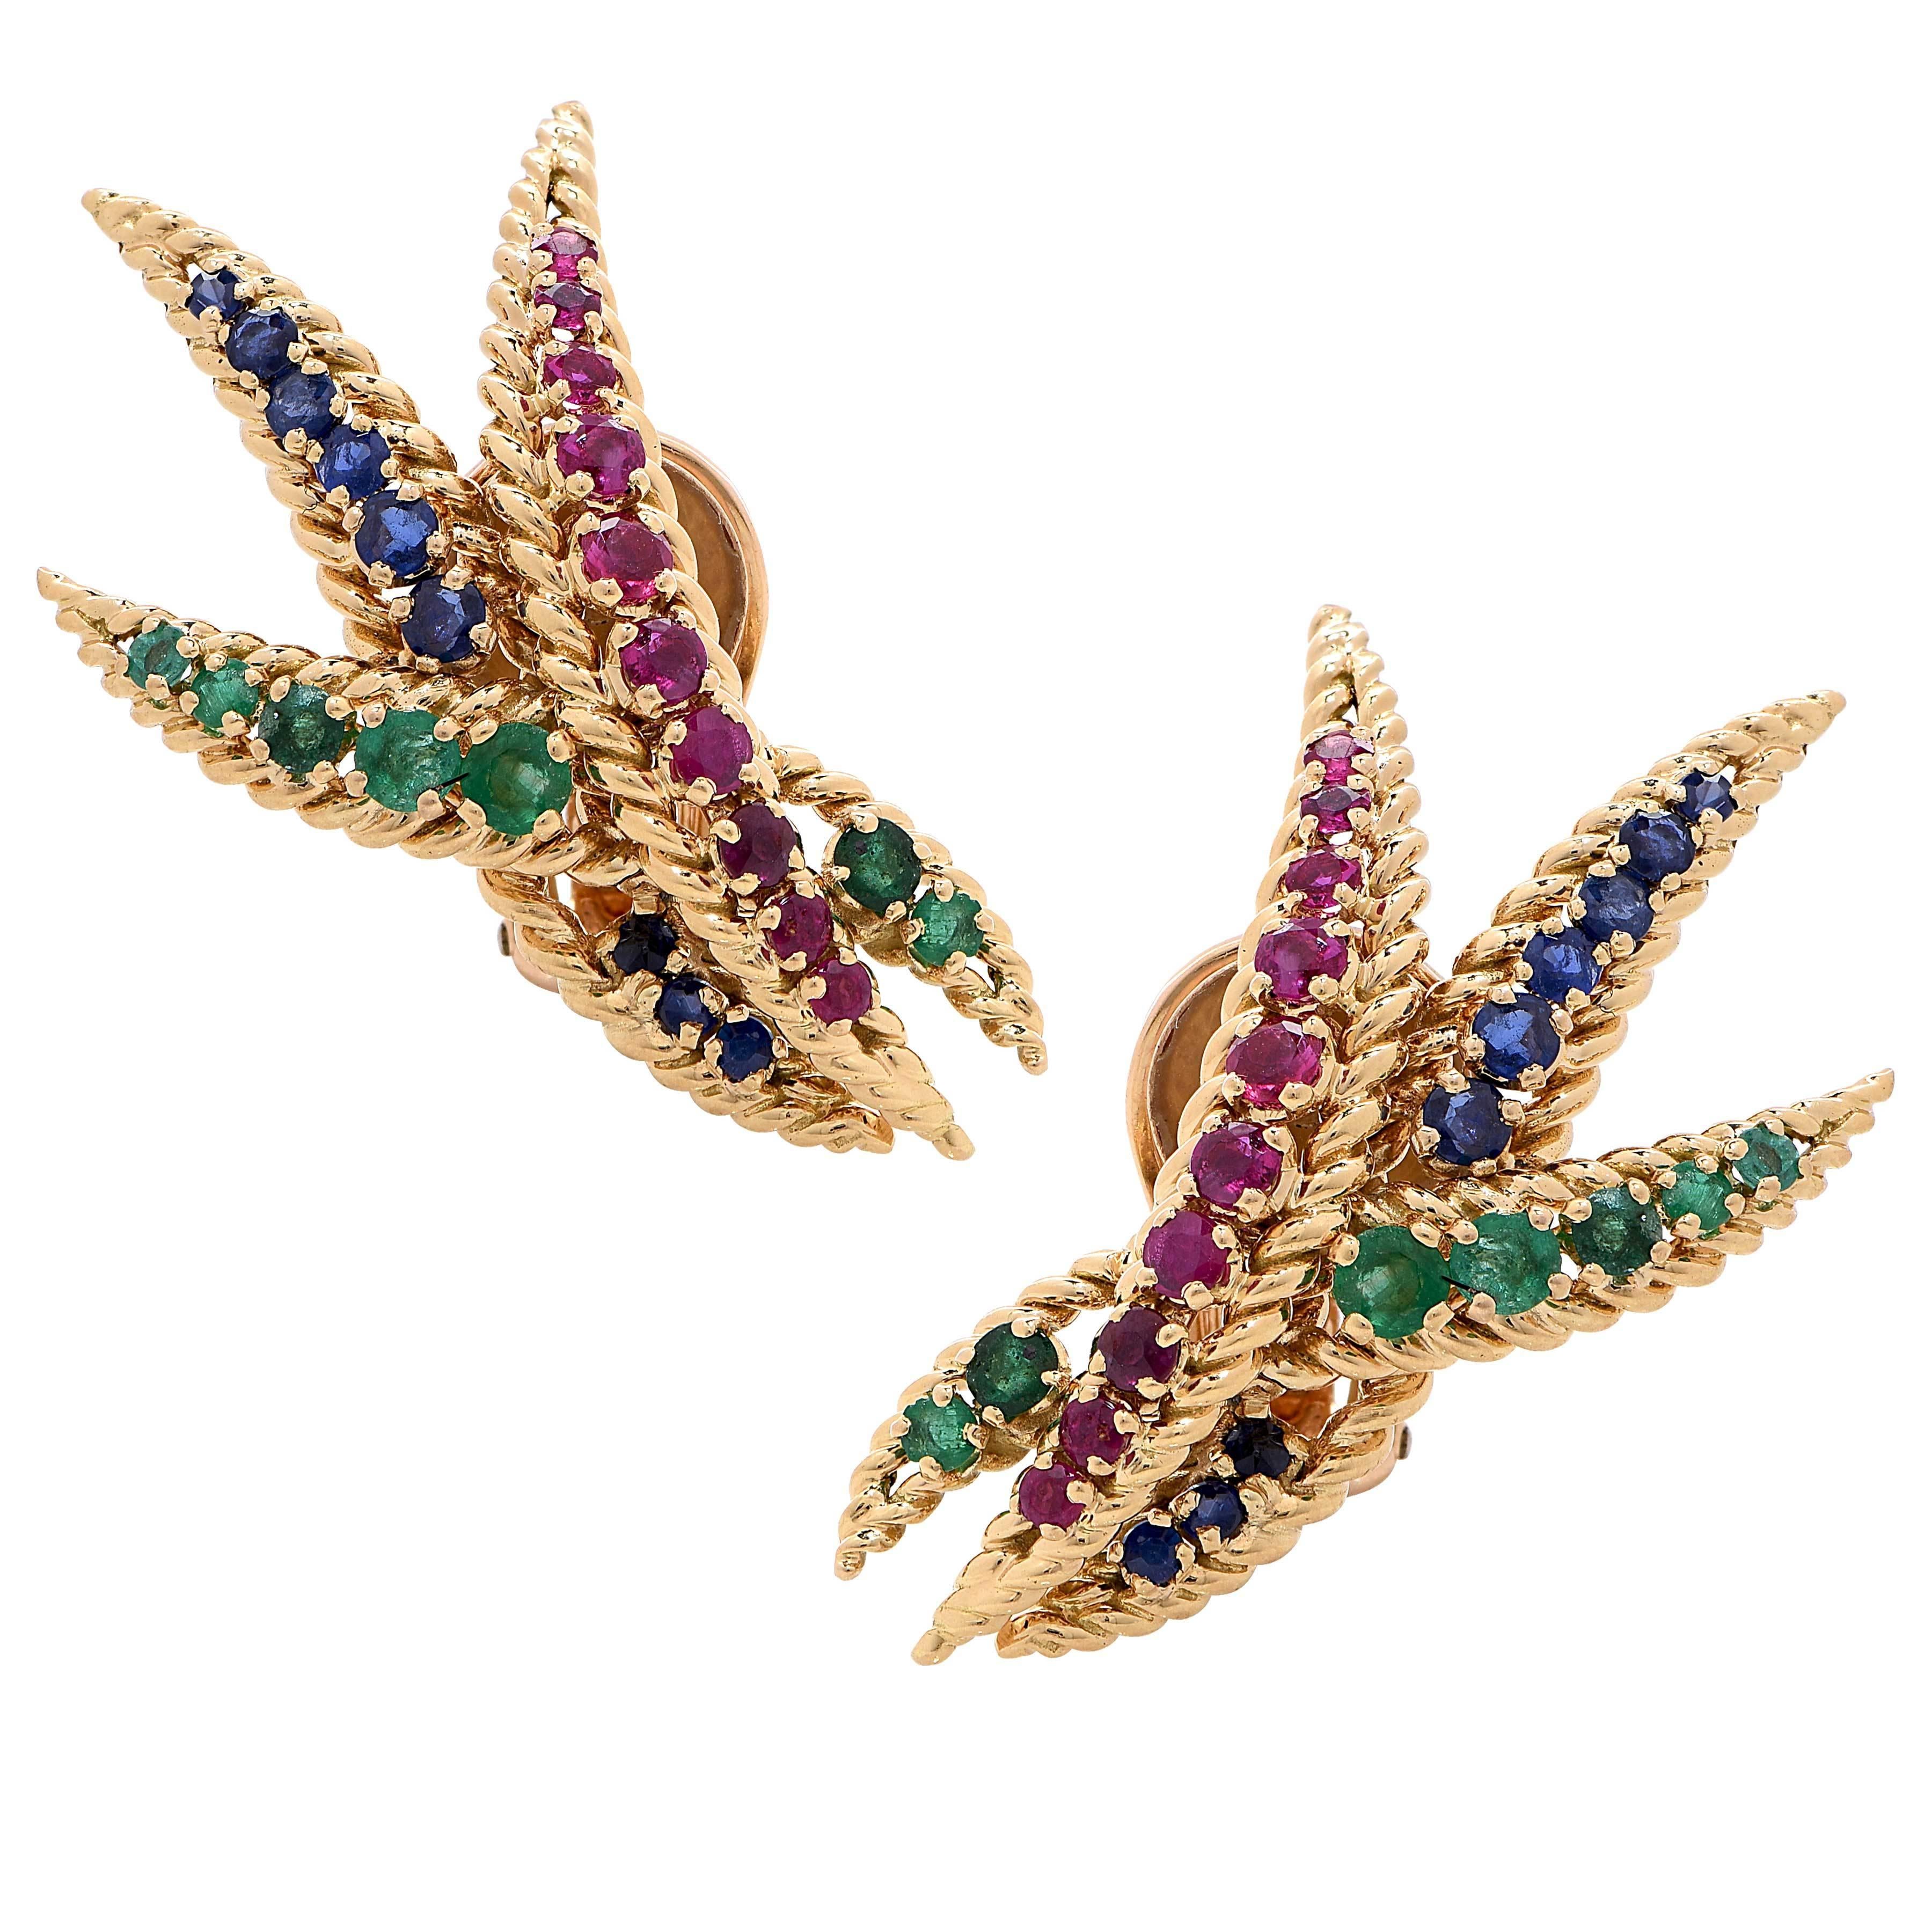 Mauboussin ear clips set with round rubies, emeralds and sapphires.
Numbered and signed Mauboussin Paris.